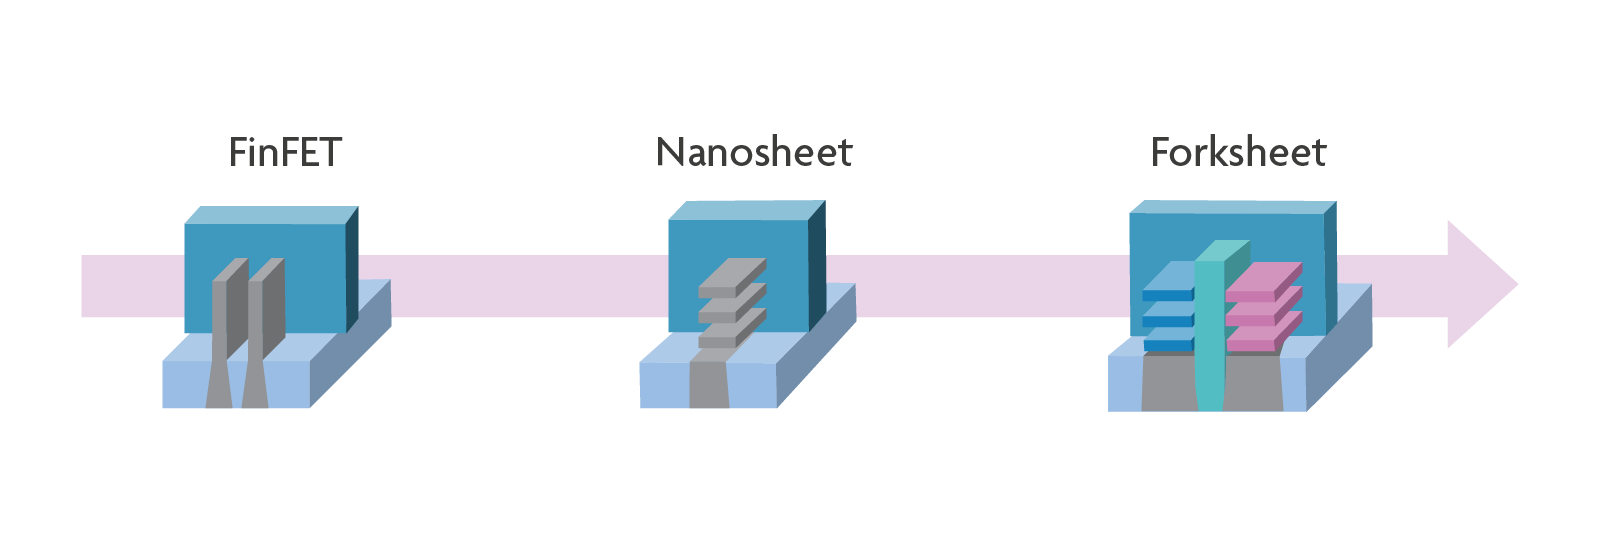 From FinFET to nanosheet and to forksheet